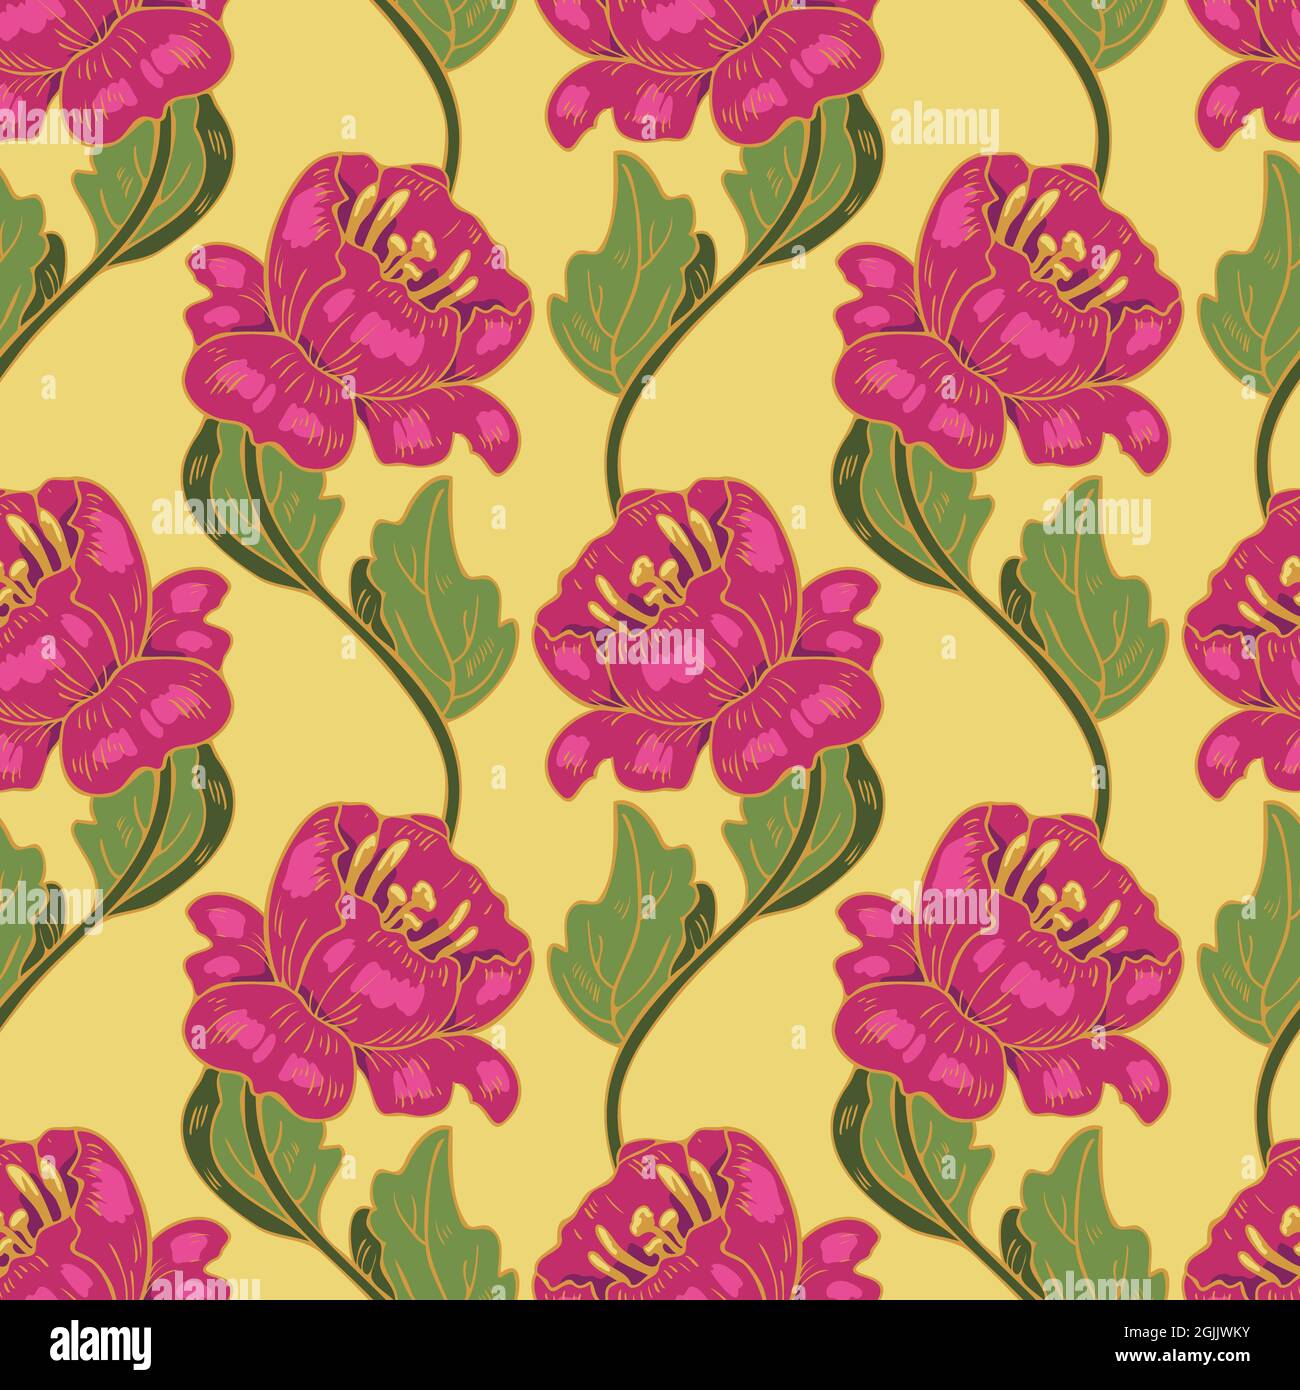 Vector Seamless Pattern With Beautiful Decorative Flowers Sophisticated Design With Stylized